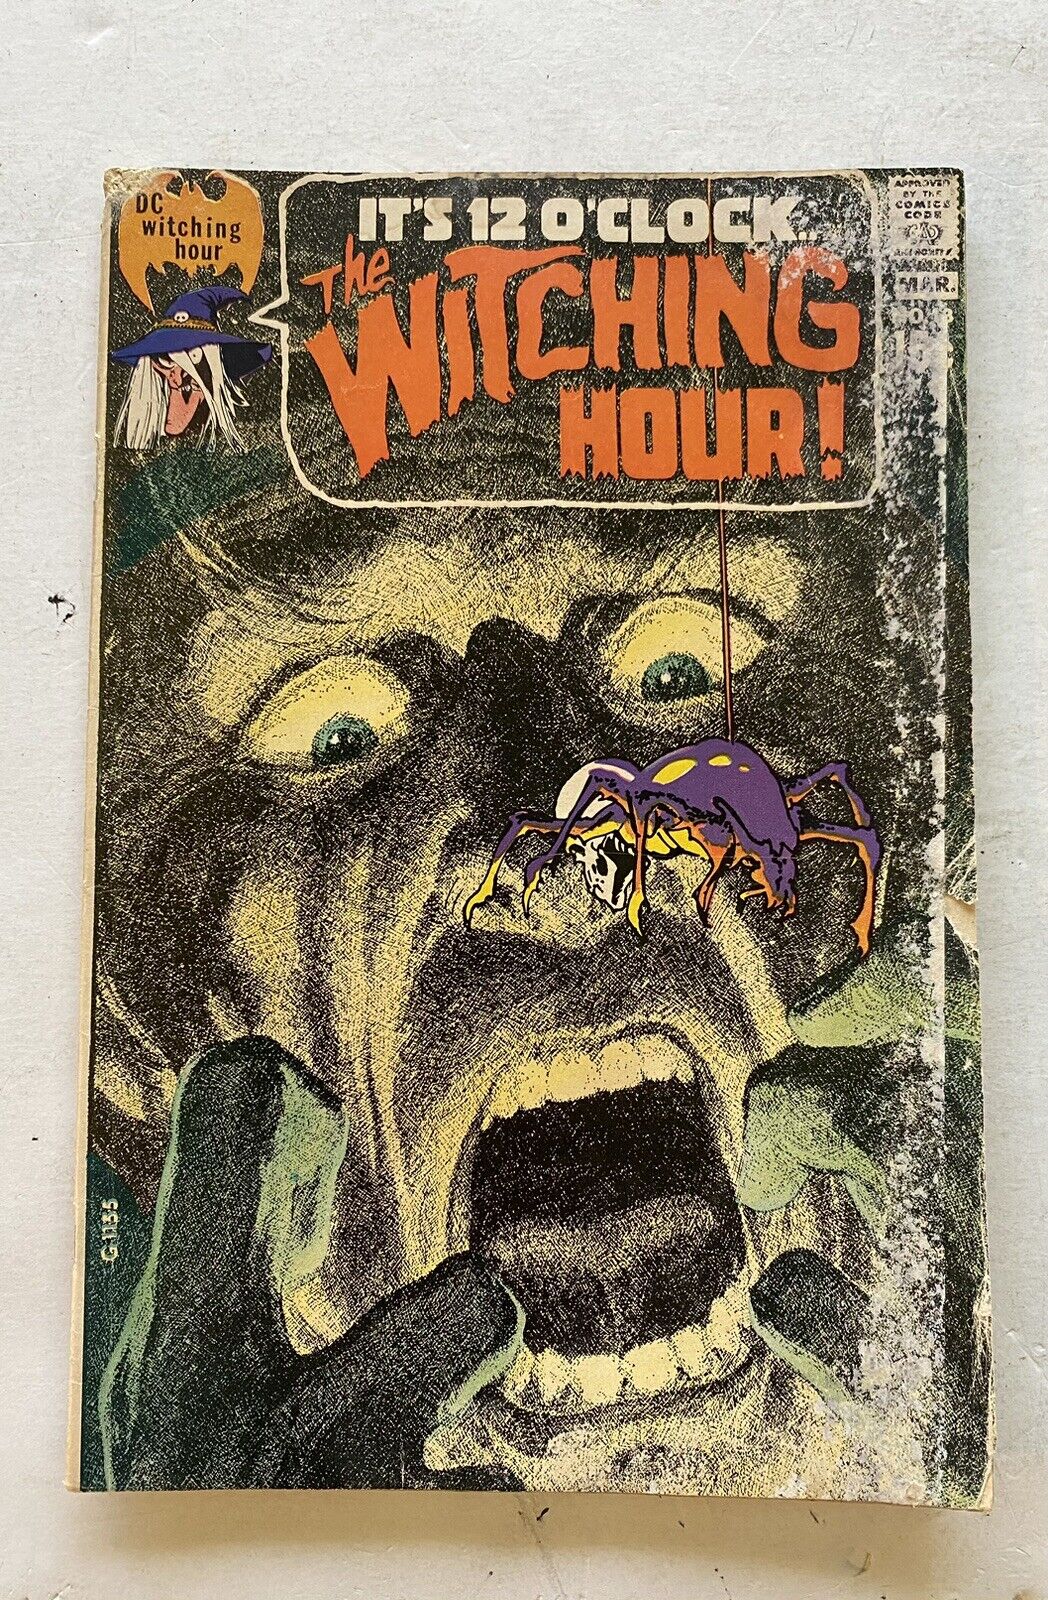 THE WITCHING HOUR #13 Awesome Neal Adams Cover  1971 DC Comics Dick Giordano 